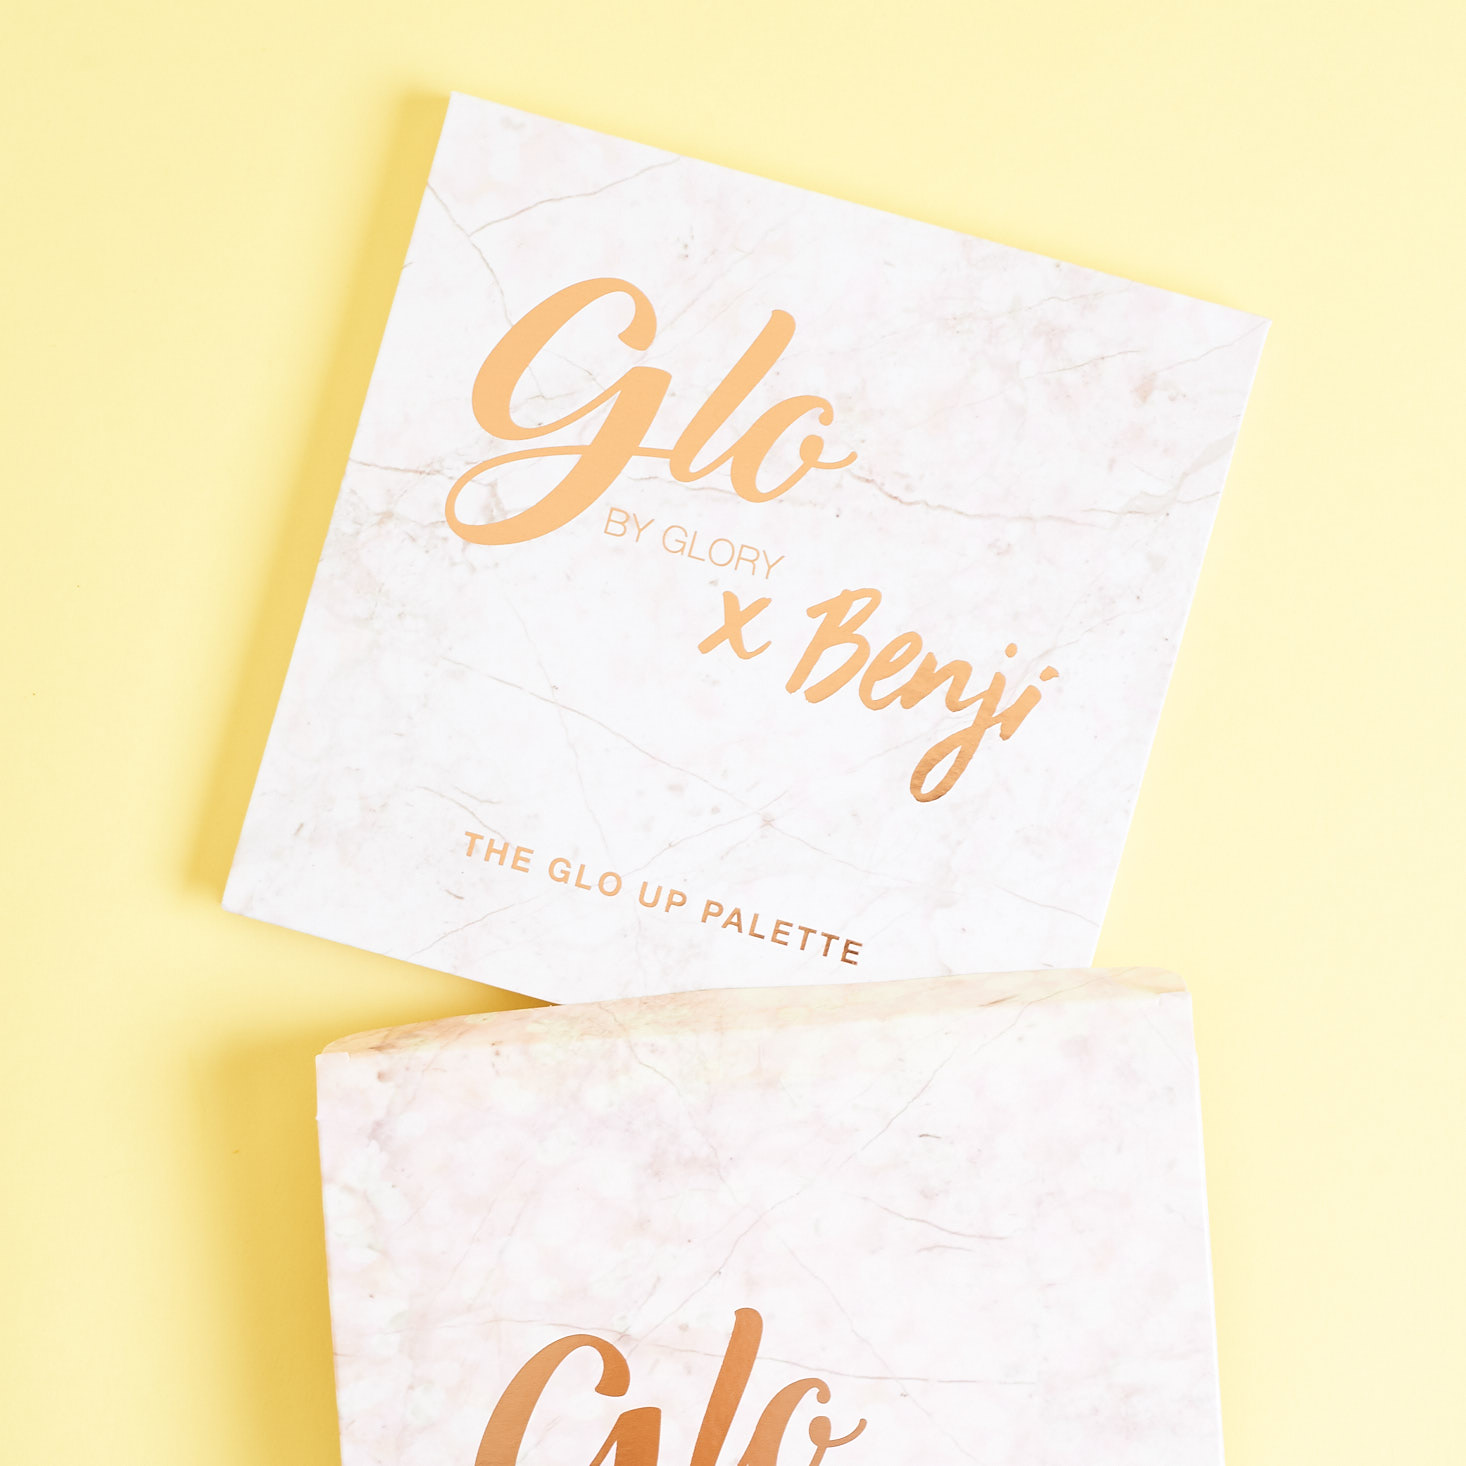 Glo By Glory x Benji Eyeshadow Palette coming out of box